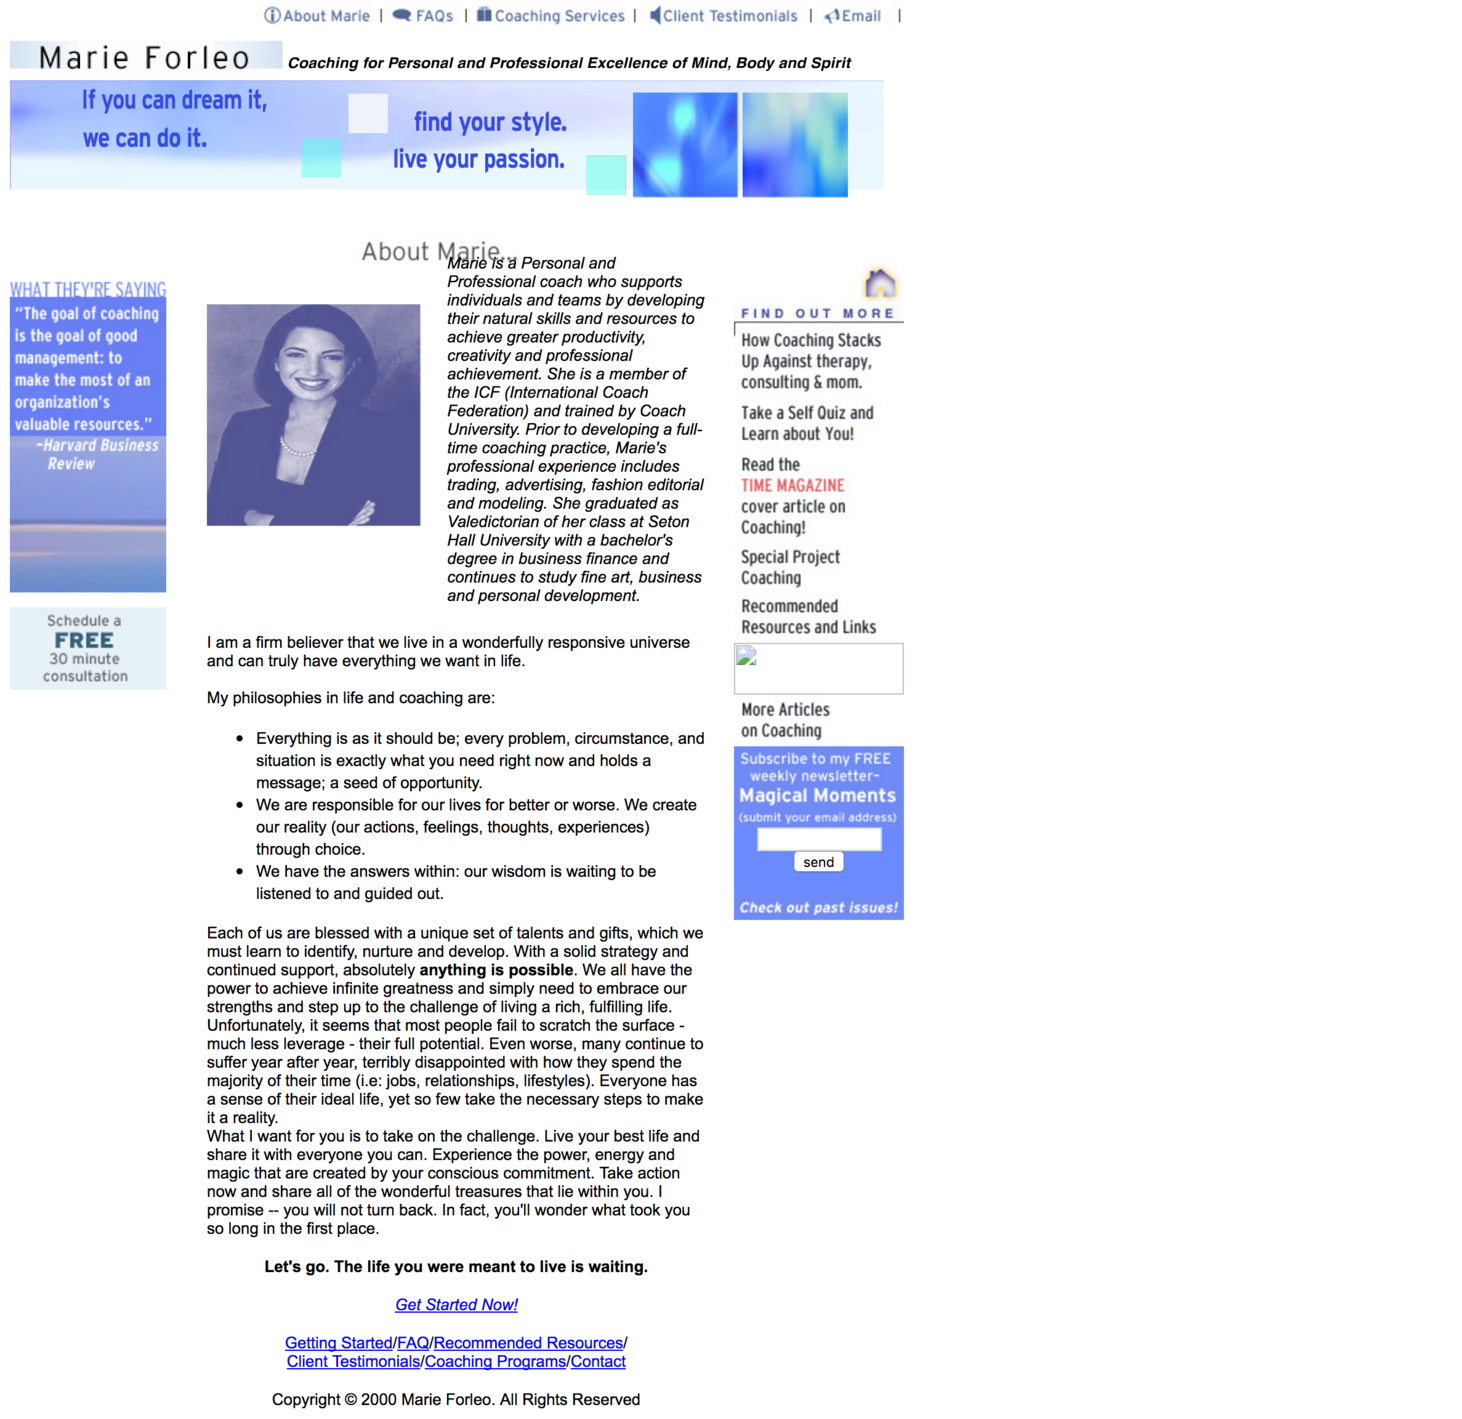 screencapture-web-archive-org-web-20010405233300-http-www-marieforleo-com-80-pages-aboutmar-html-1501801779632.png